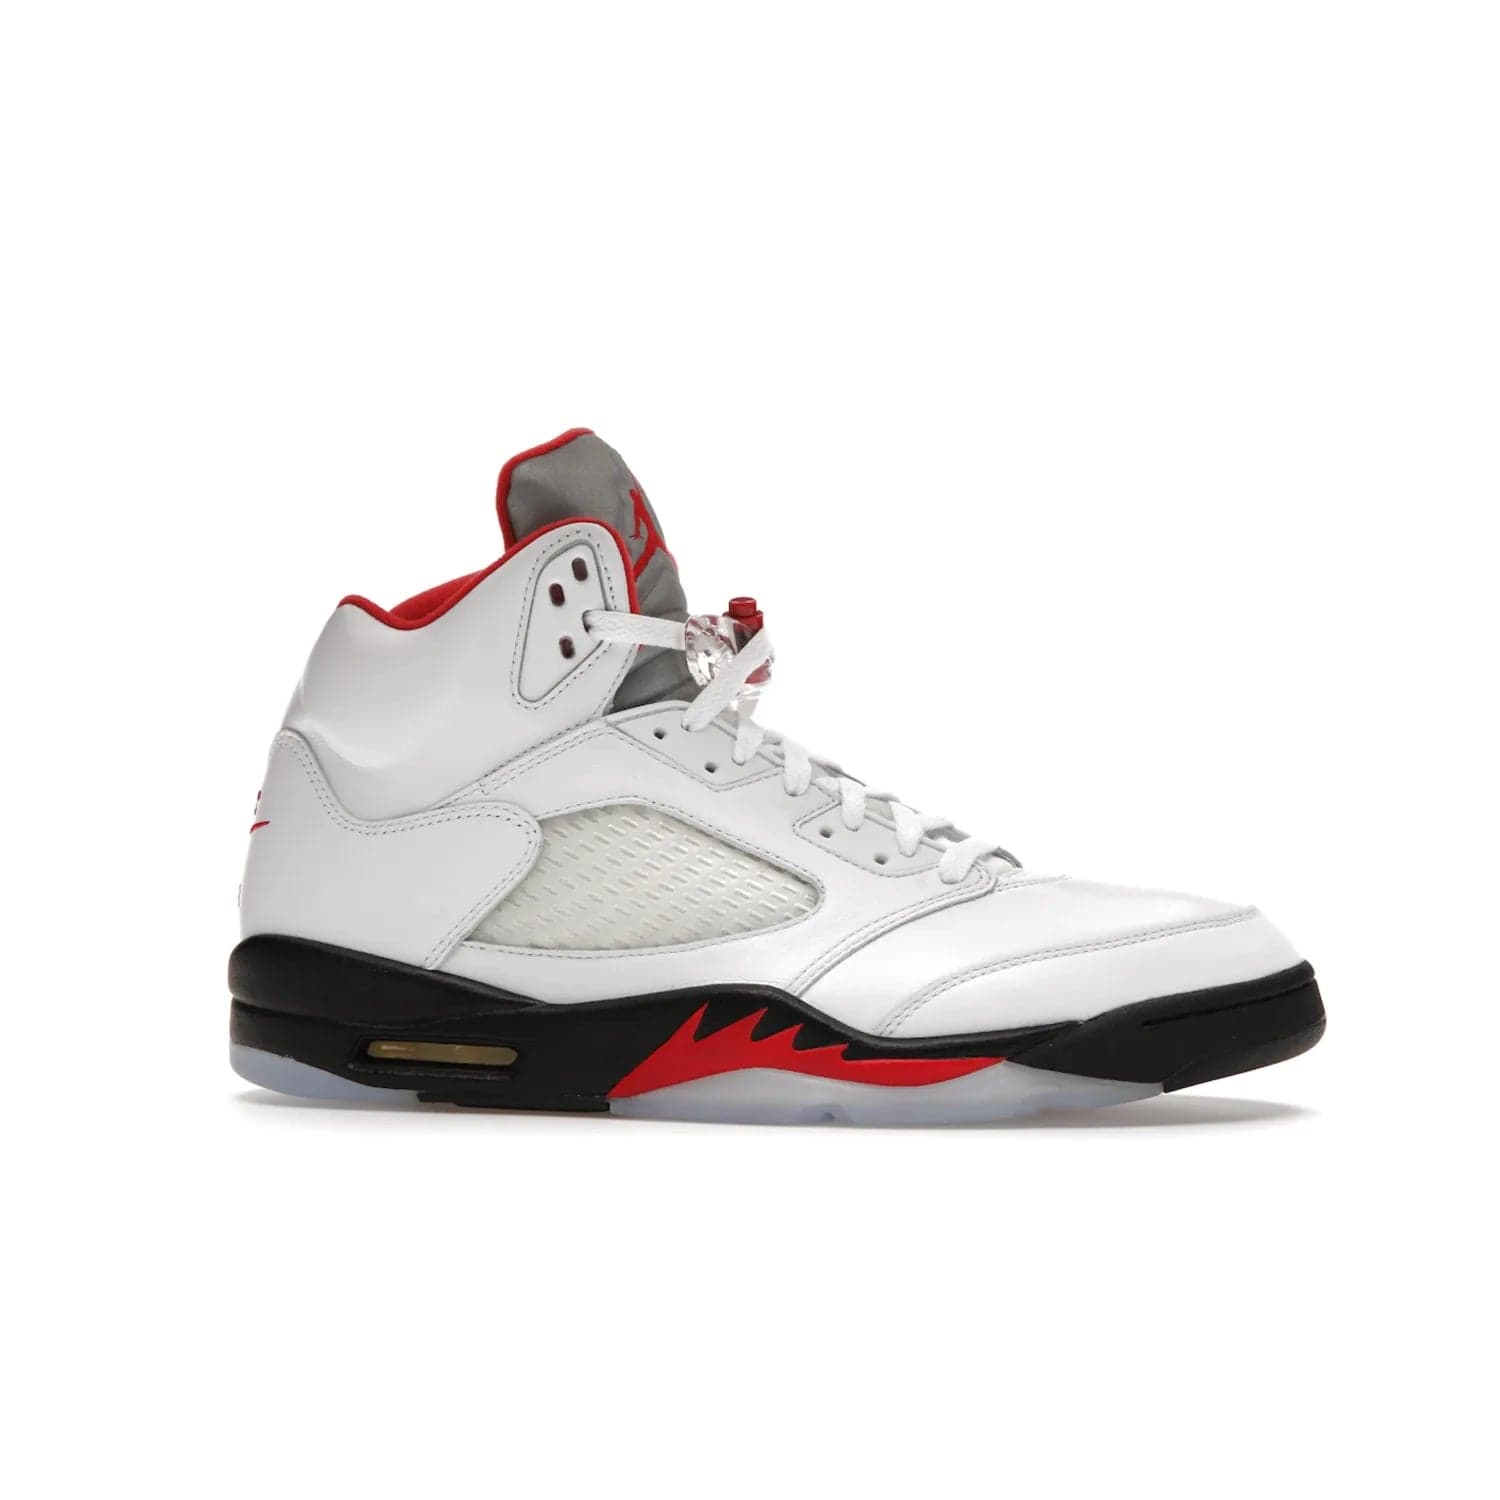 Jordan 5 Retro Fire Red Silver Tongue (2020) - Image 2 - Only at www.BallersClubKickz.com - Experience classic styling with the Jordan 5 Retro Fire Red Silver Tongue (2020). Features a white leather upper, 3M reflective tongue, midsole colorblocking, and an icy translucent outsole. Now available, upgrade your shoe collection today.